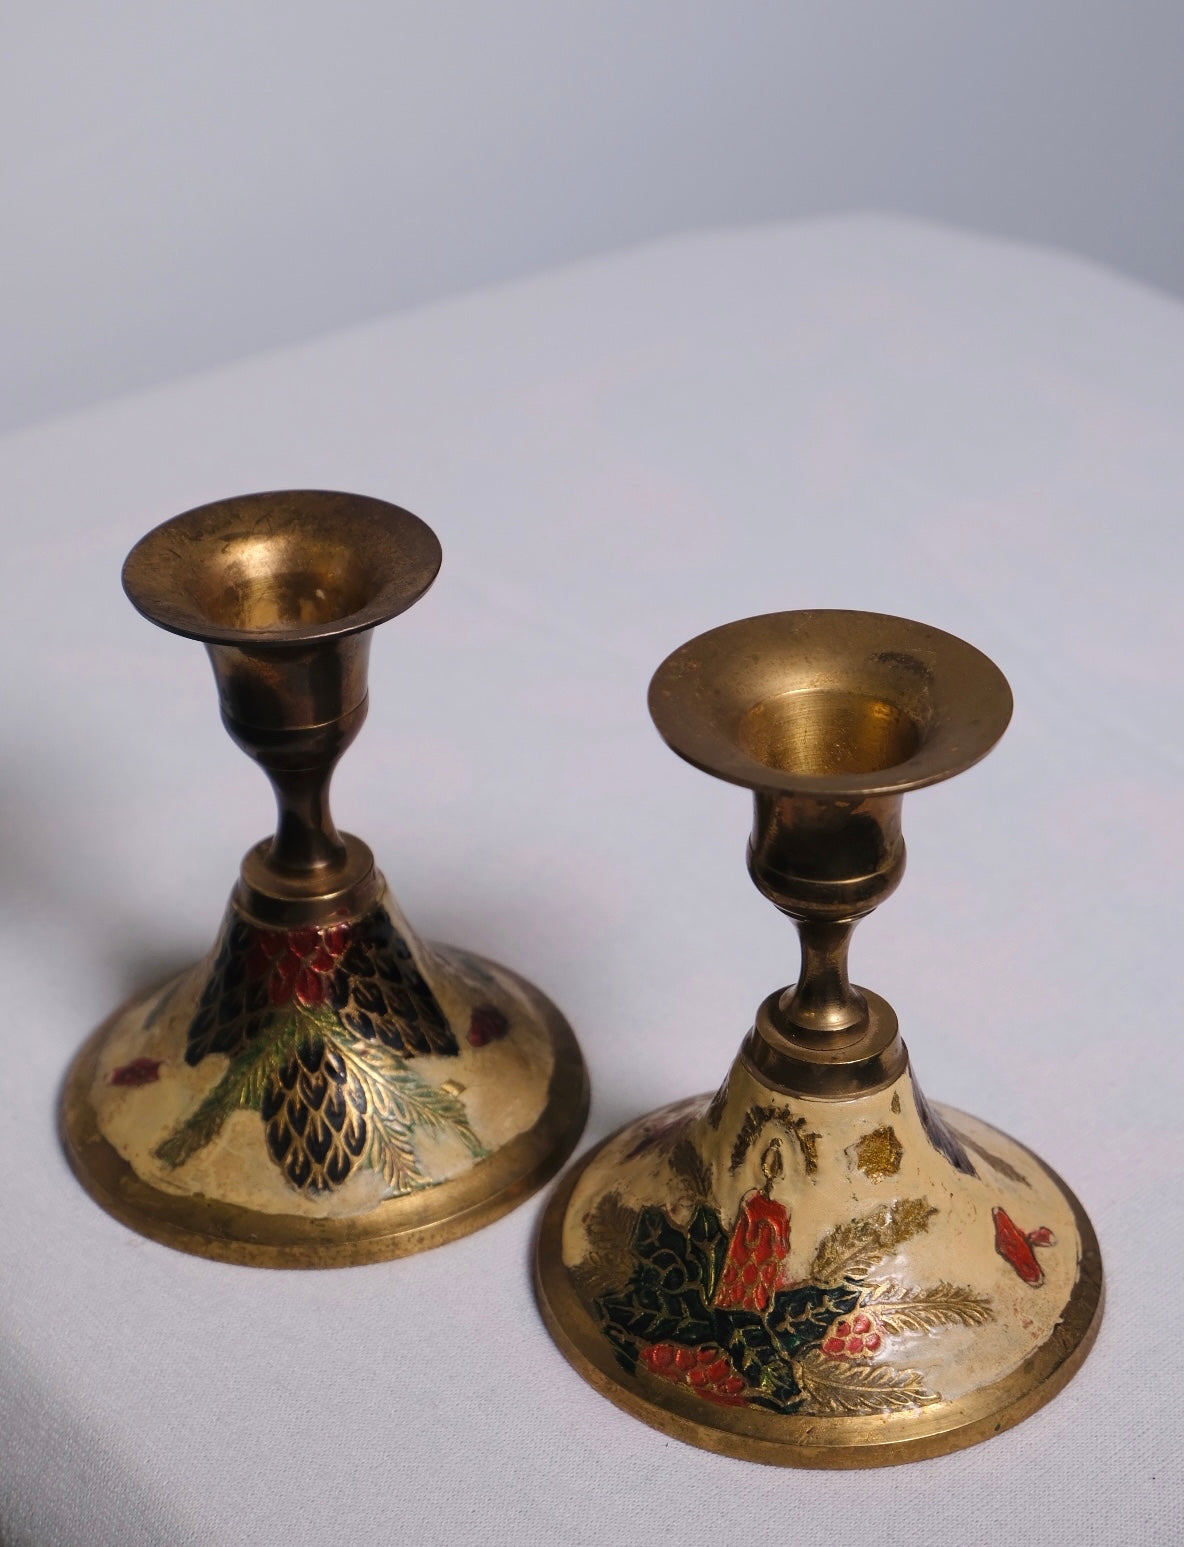 Vintage Christmas Brass Candle Holders